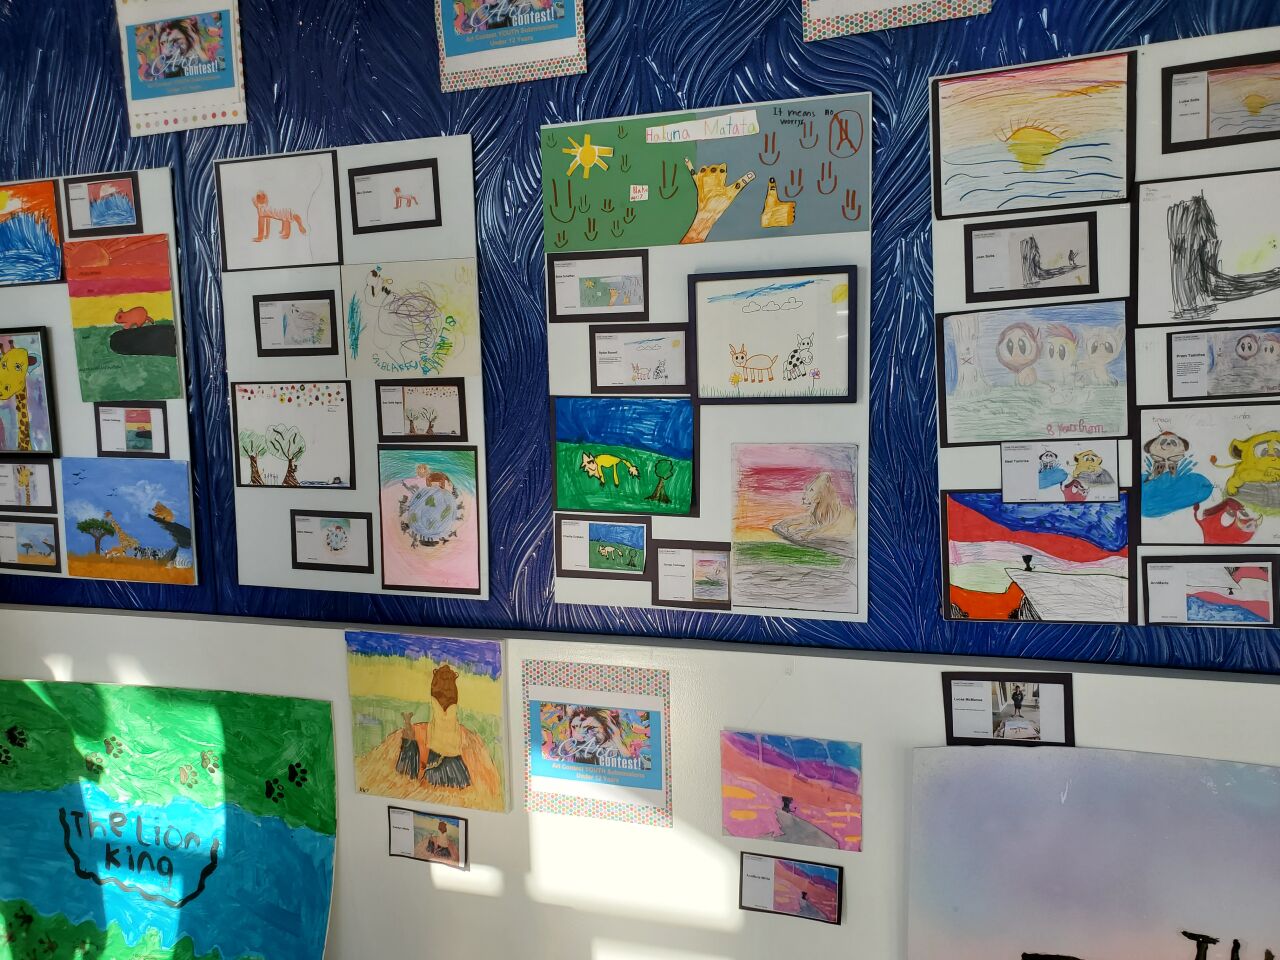 Art submitted by children fills a wall at Pacific Sotheby's International Realty on Prospect Street in La Jolla.